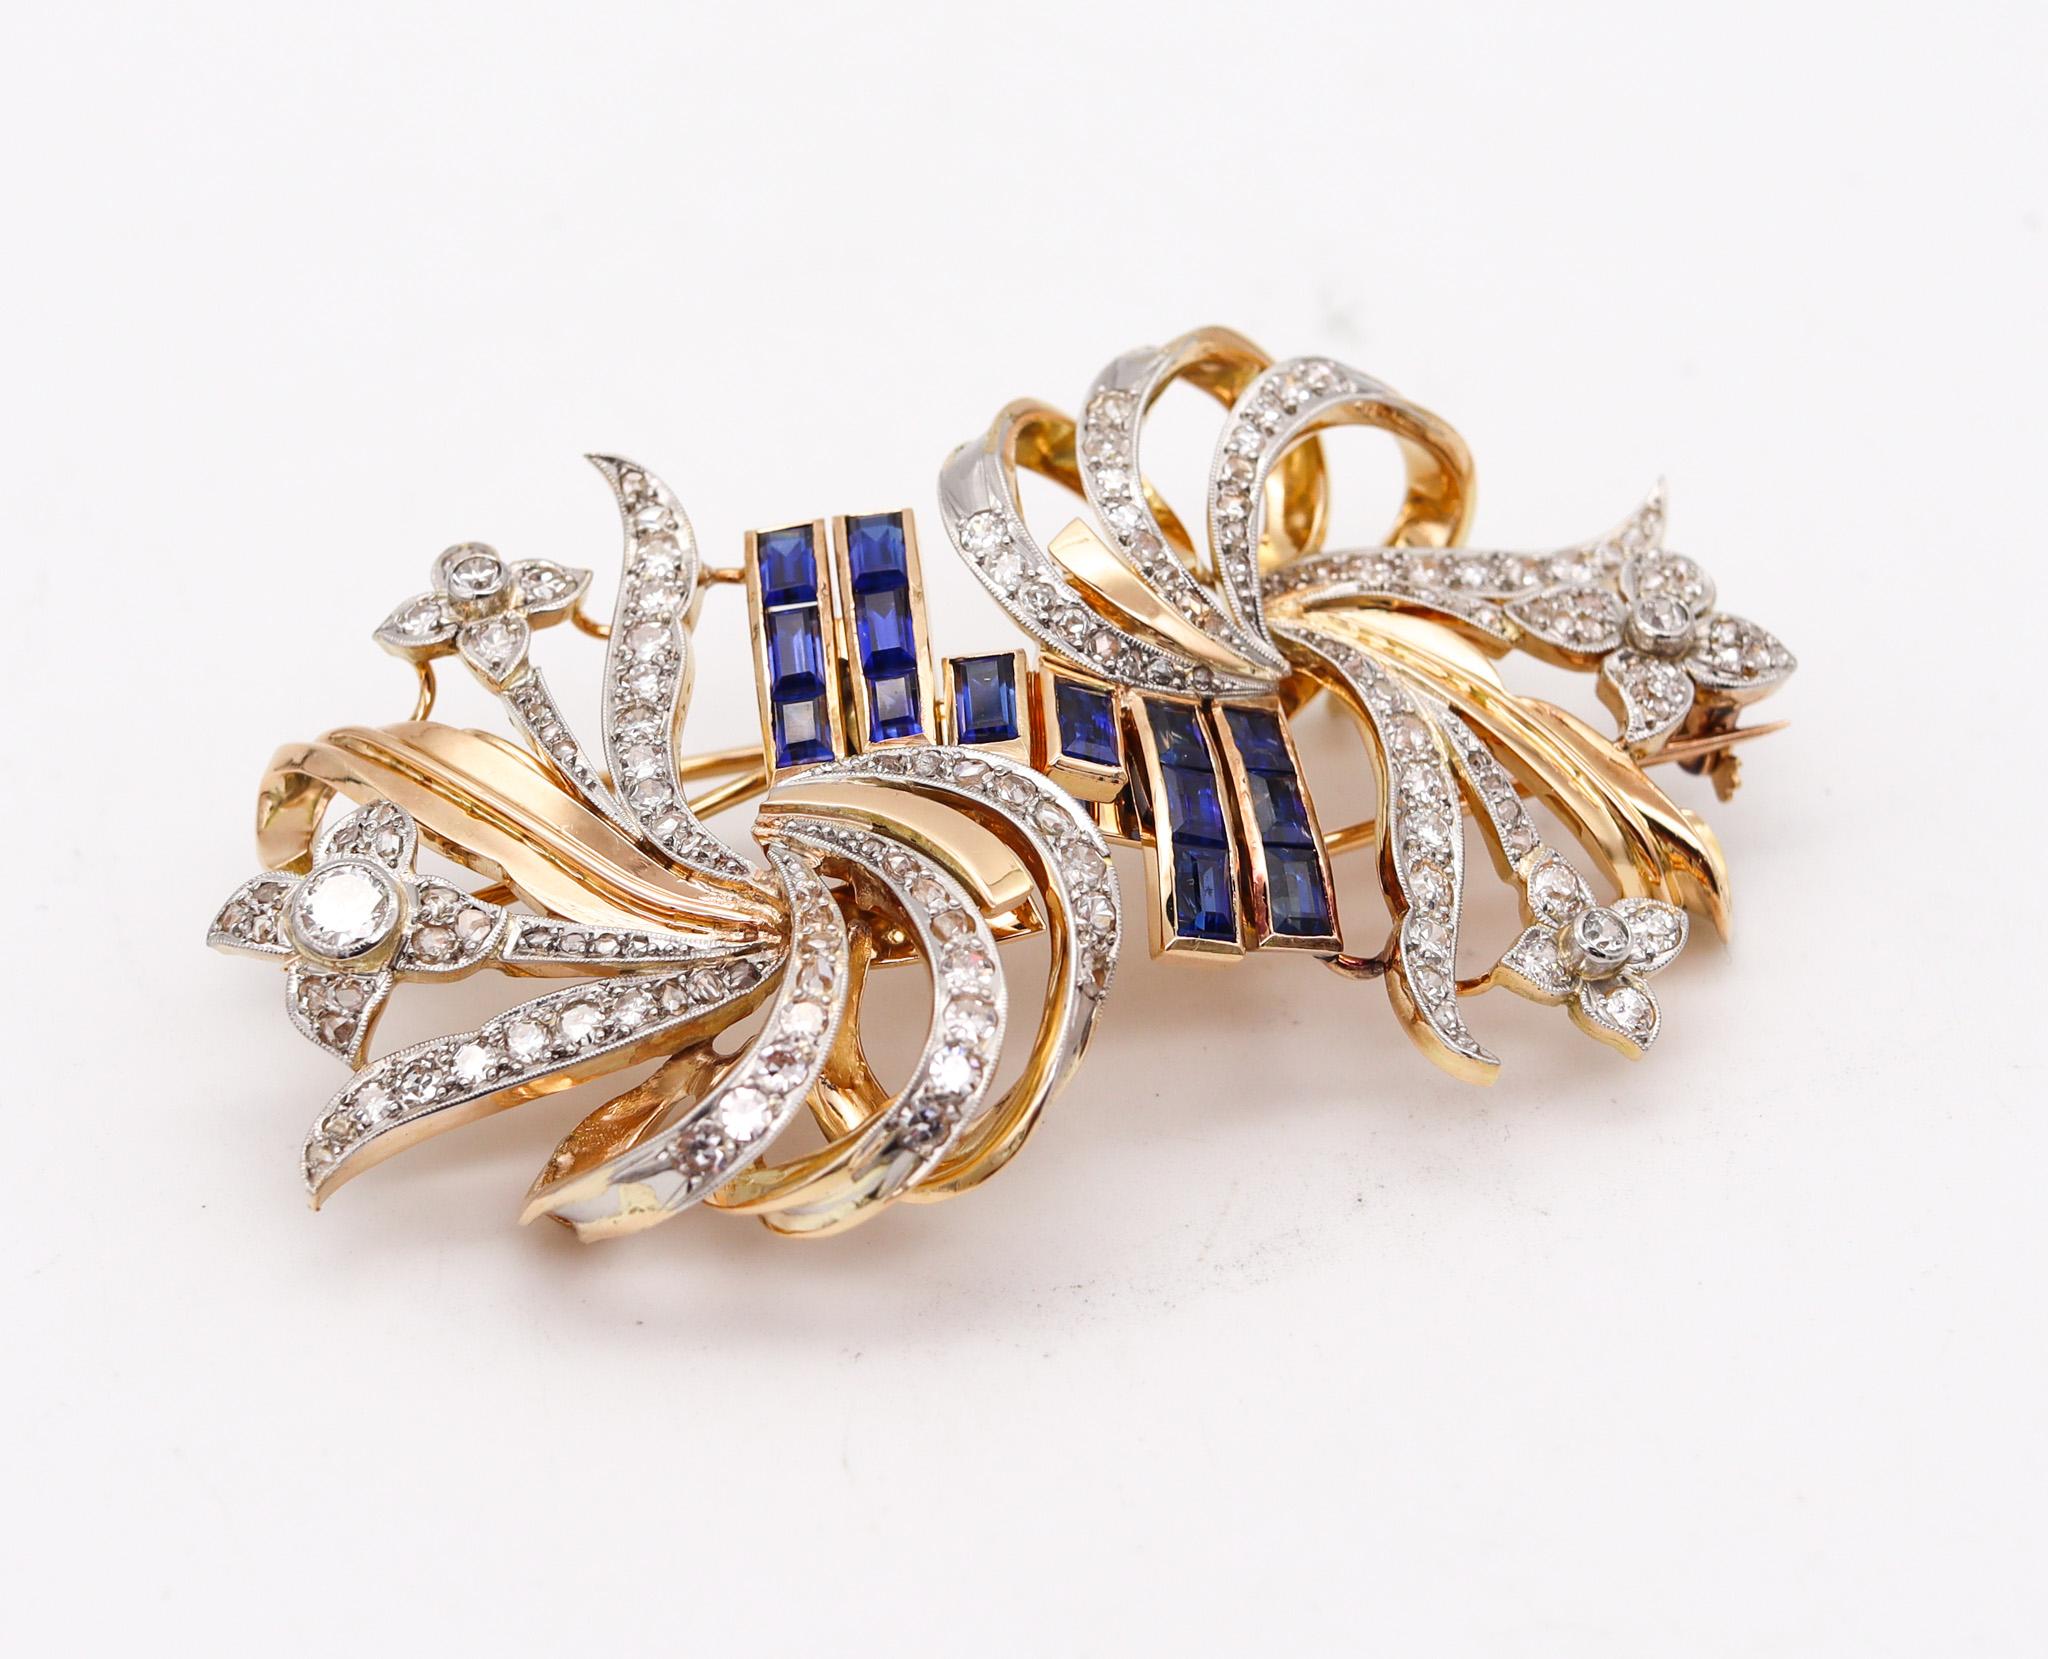 Great art deco dress clips brooches.

Stunning pair of convertible dress clips brooches, created during the late art deco and the retro periods, back in the 1935. This gorgeous piece has been crafted as a very versatile convertible pendant, brooch